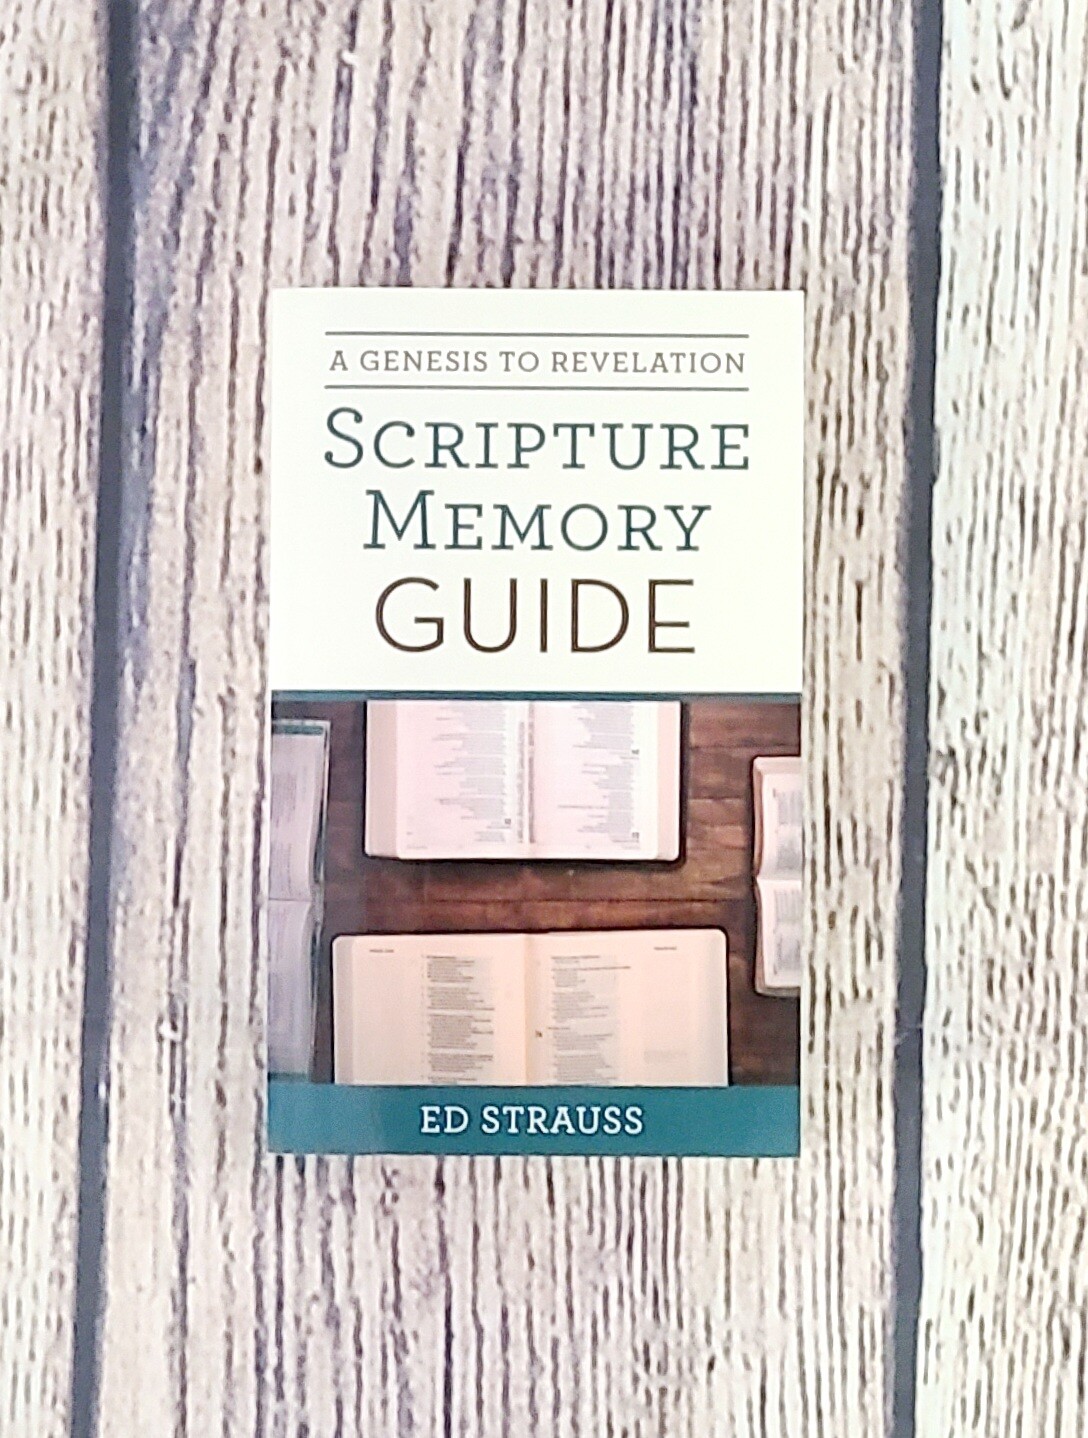 A Genesis to Revelation Scripture Memory Guide by Ed Strauss - Paperback - New